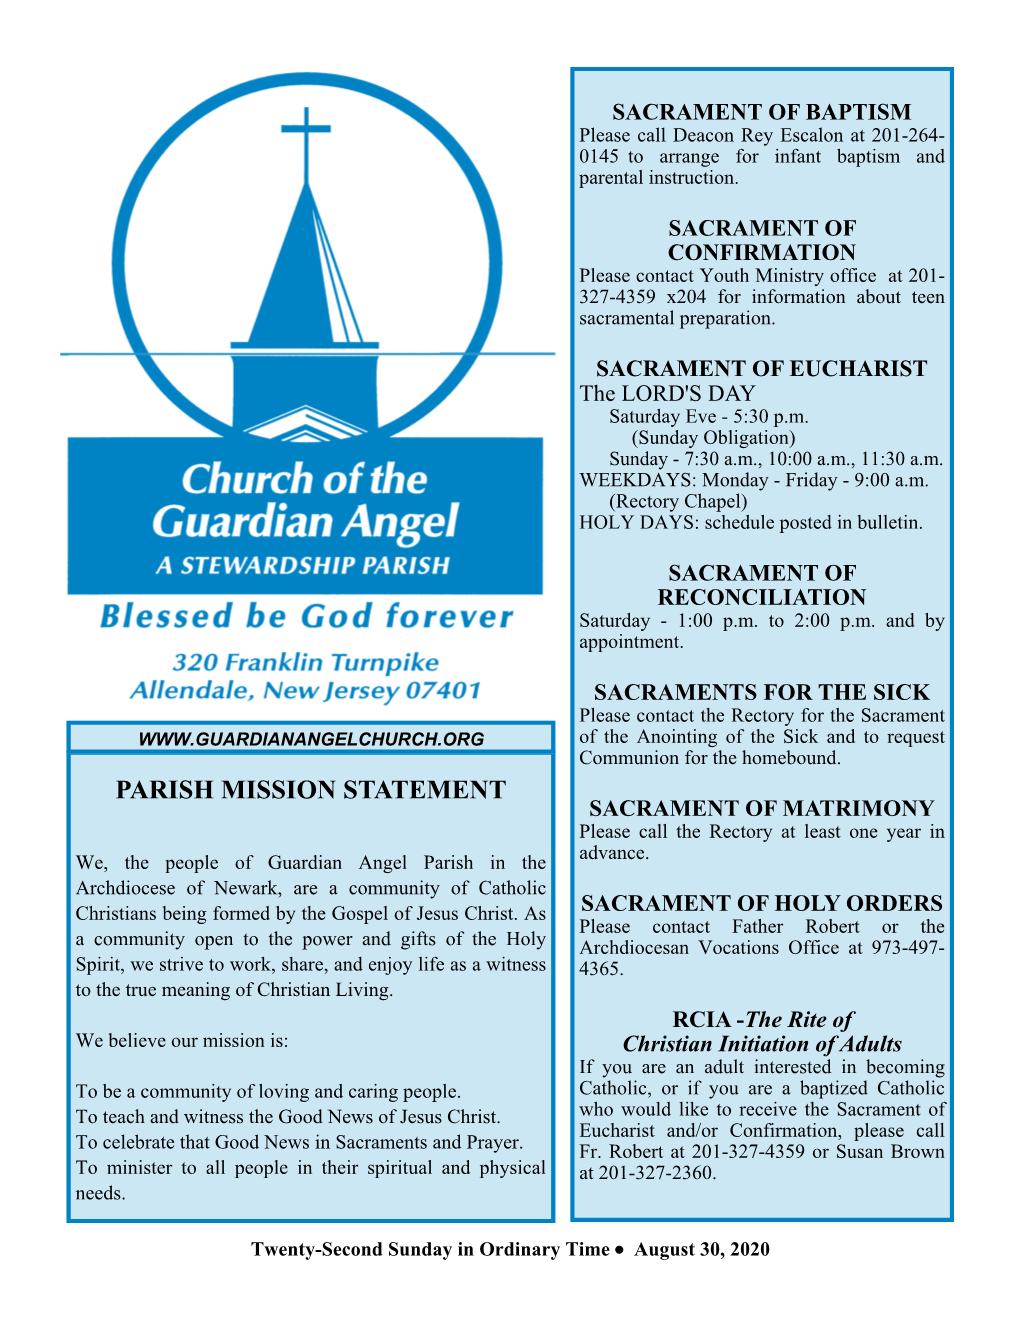 PARISH MISSION STATEMENT SACRAMENT of MATRIMONY Please Call the Rectory at Least One Year in We, the People of Guardian Angel Parish in the Advance